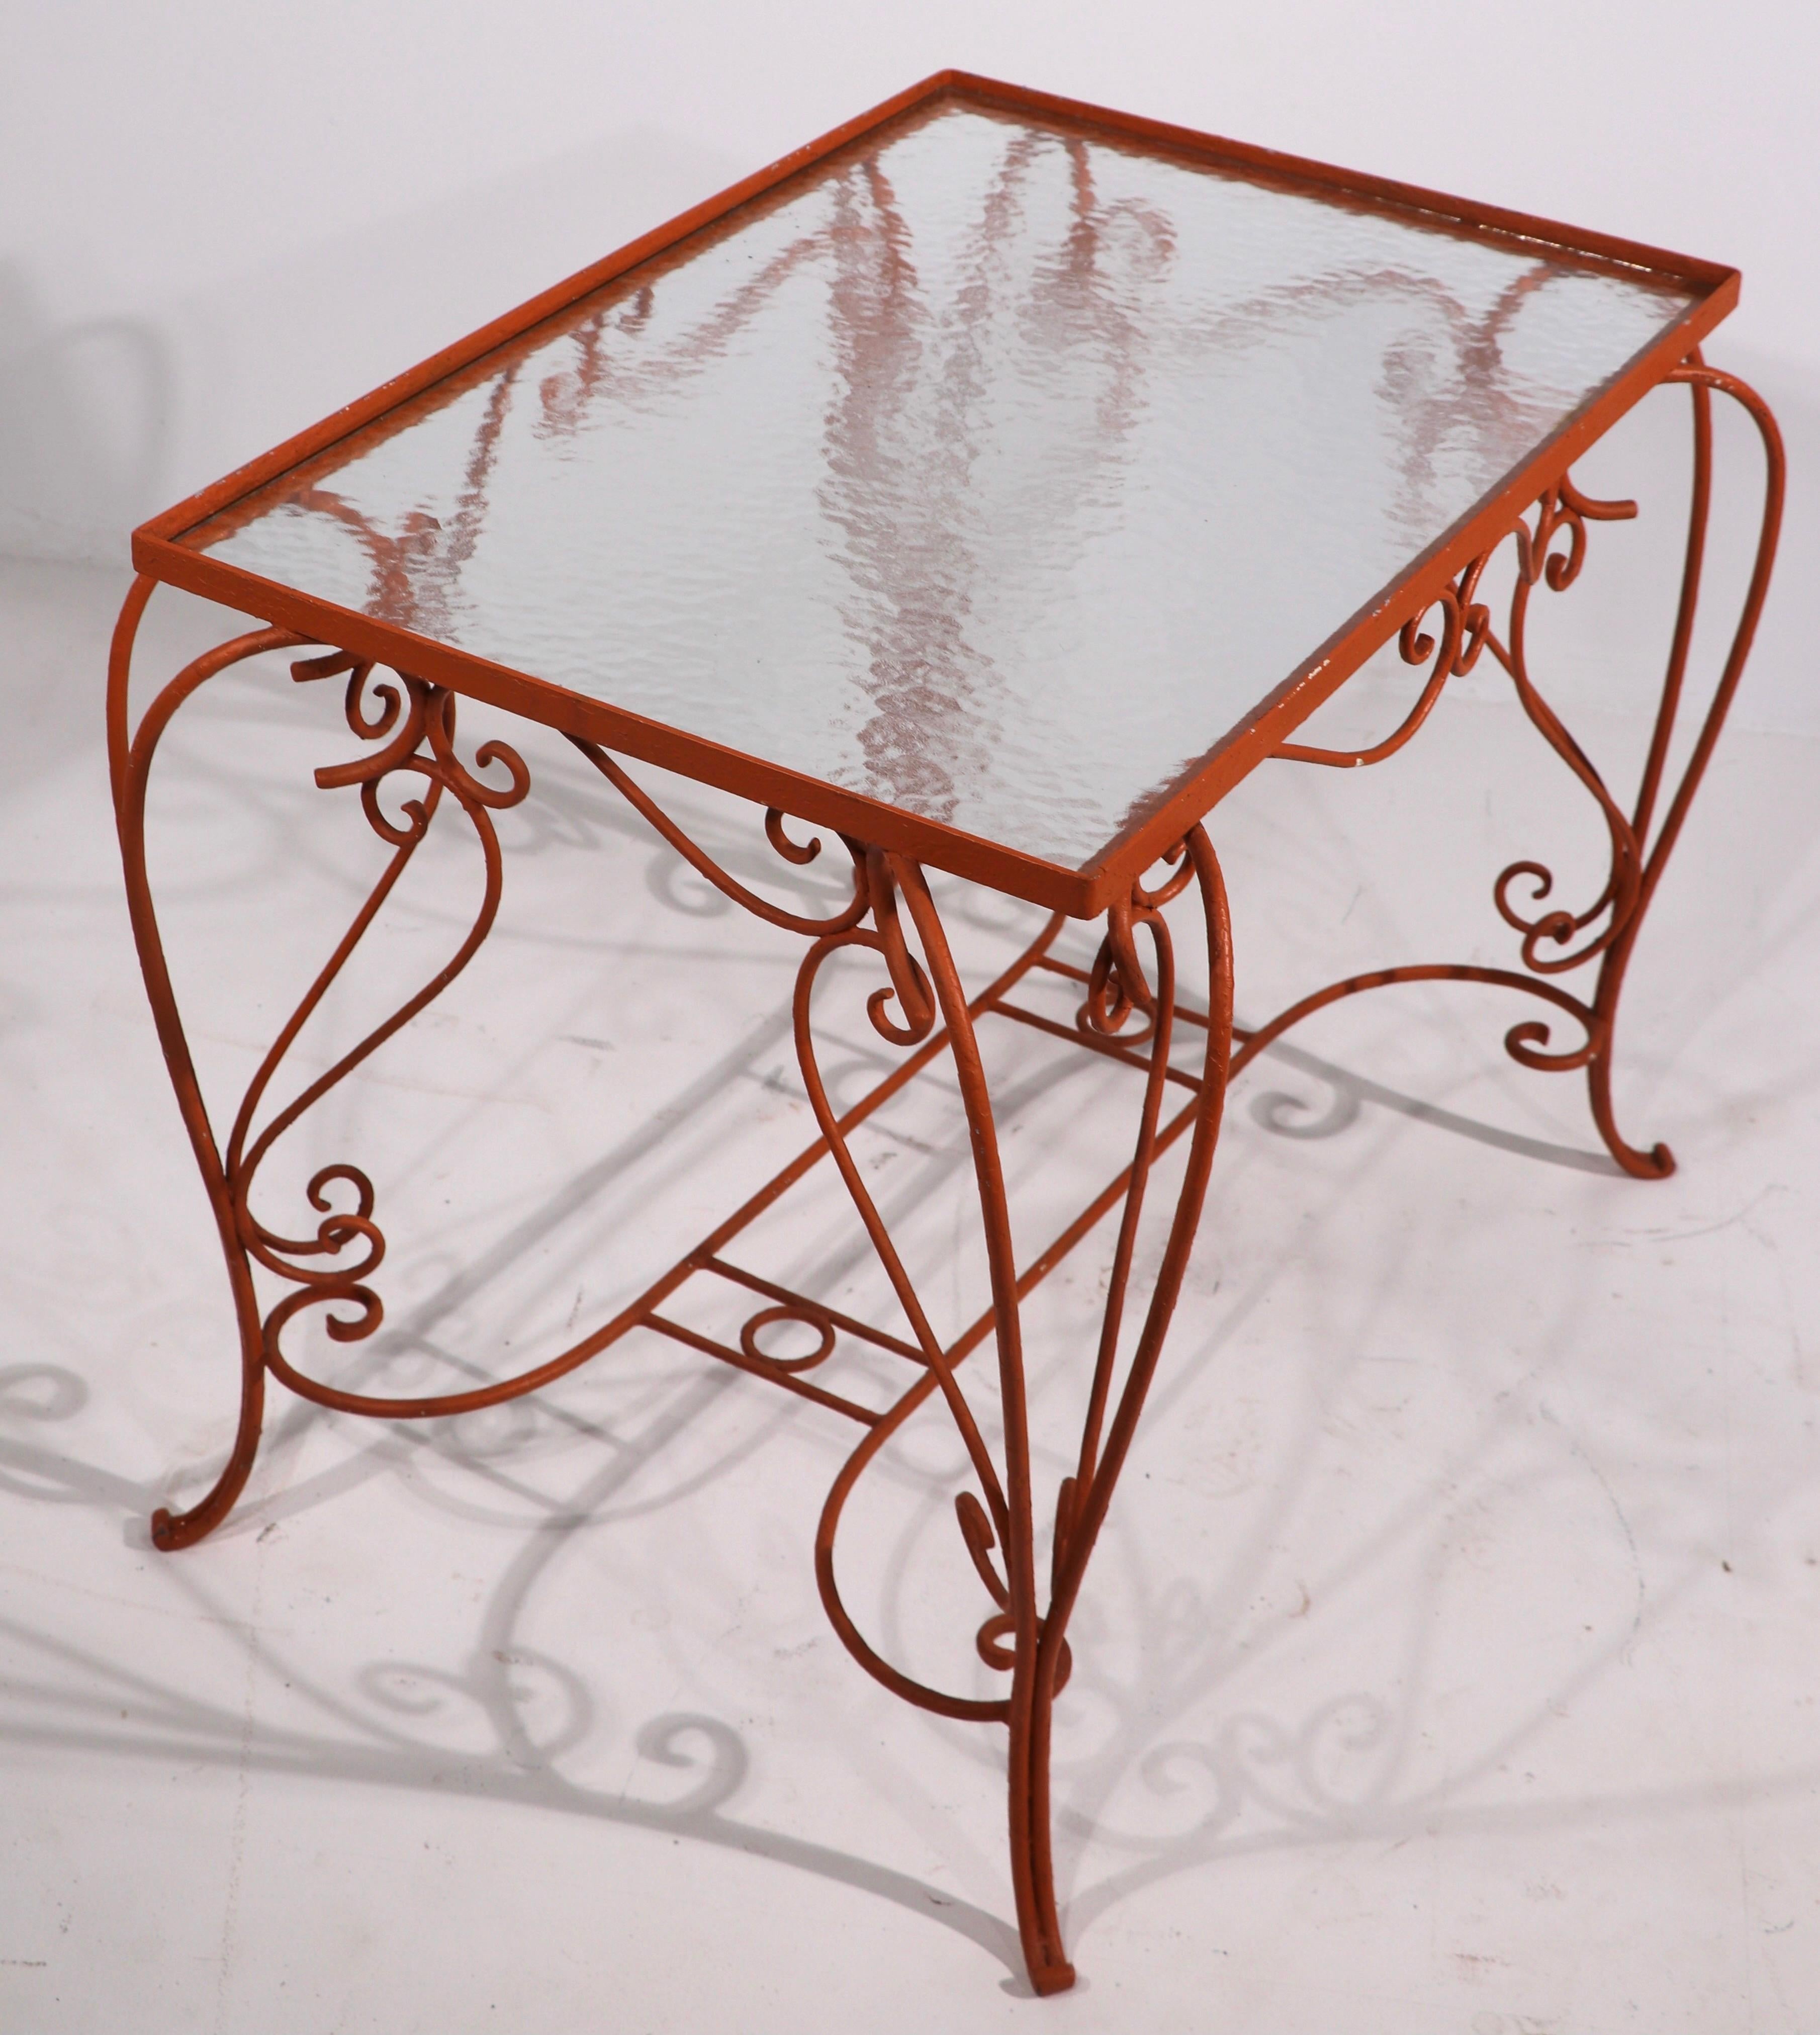 Ornate Wrought Iron Garden Patio Poolside Table with Textured Glass top 5